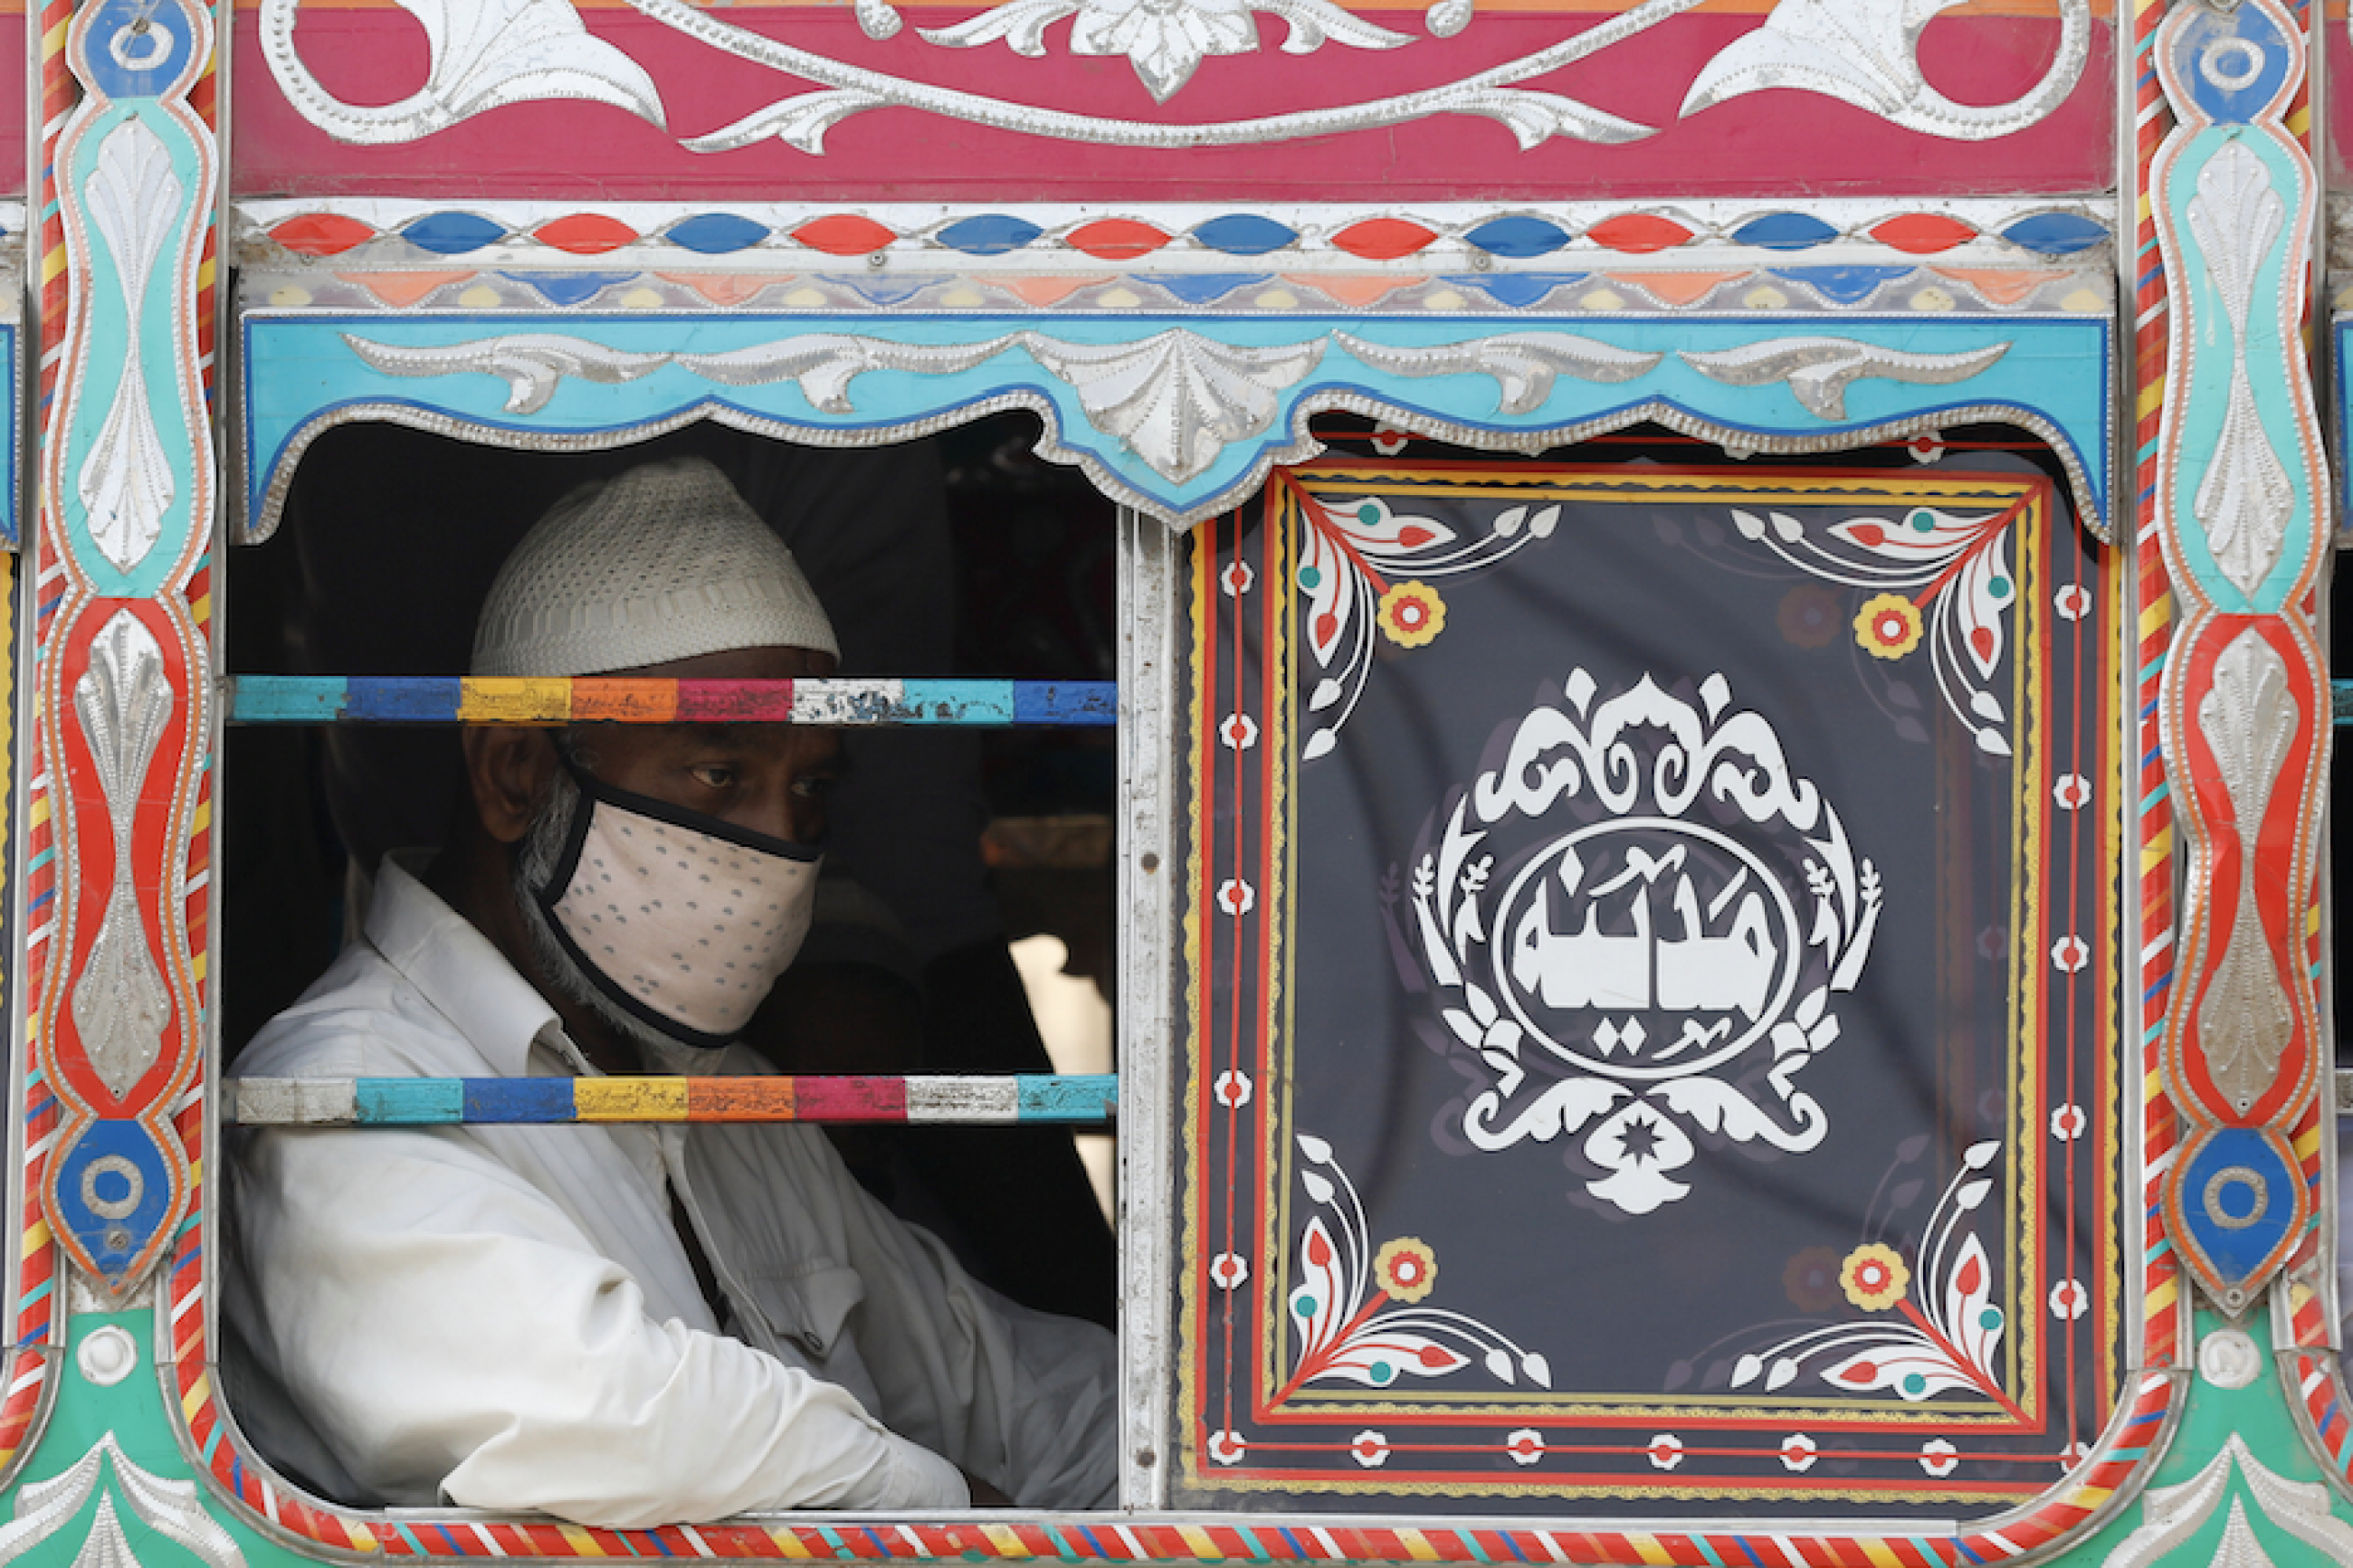 A passenger wearing a protective face mask is seen from the window of a bus, after the provincial government started easing the lockdown restrictions and allowed to resume city public transport in Sindh, as the outbreak of the coronavirus disease (COVID-19) continues, in Karachi, Pakistan June 3, 2020. REUTERS/Akhtar Soomro